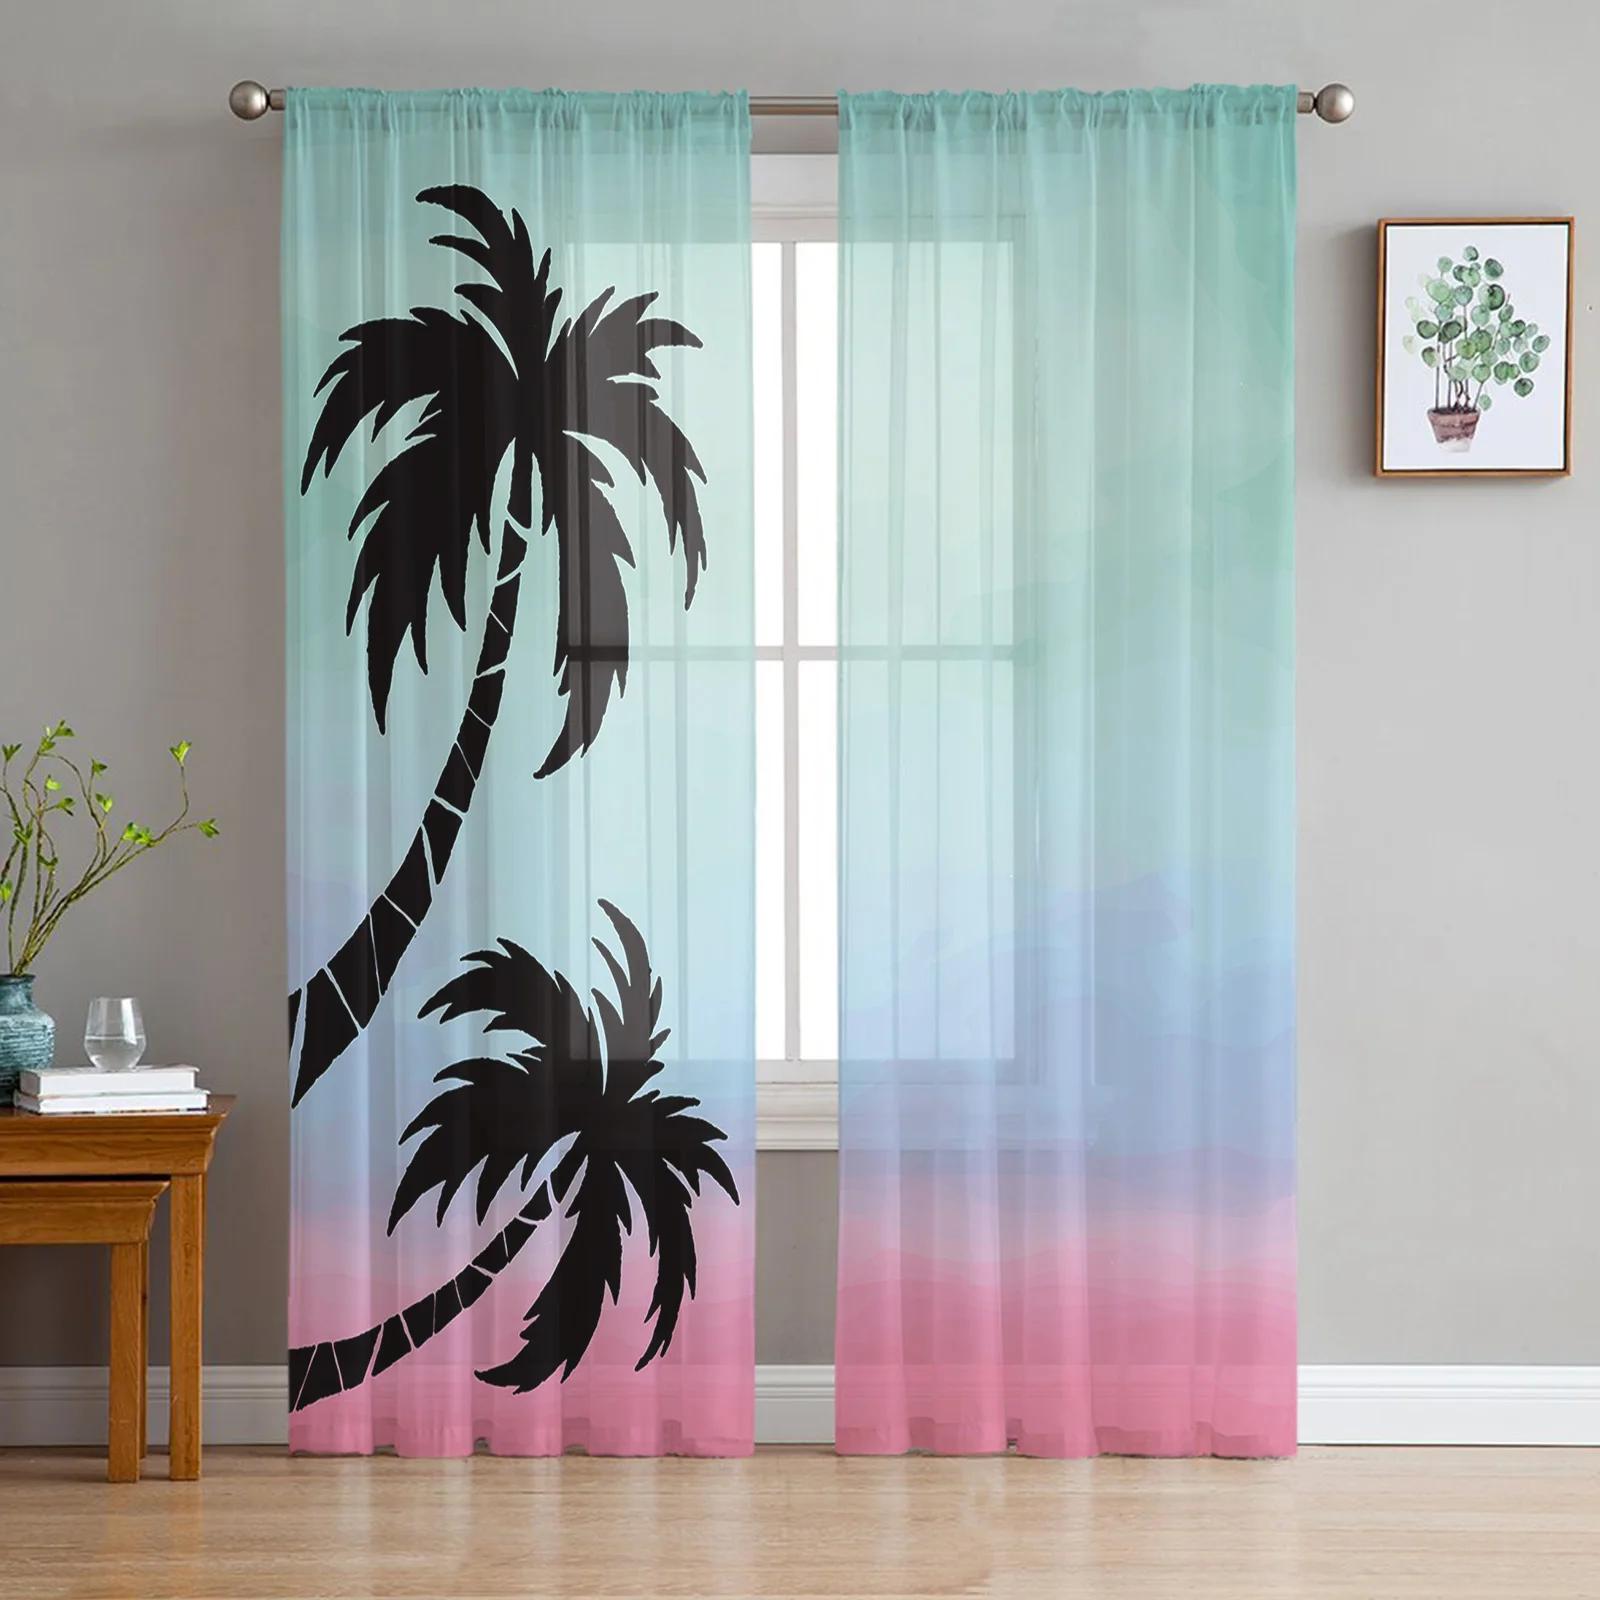 Tropical Palm Trees Sunset Summer Sheer Curtains for Living Room Printed Tulle Window Curtain Luxury Home Balcony De